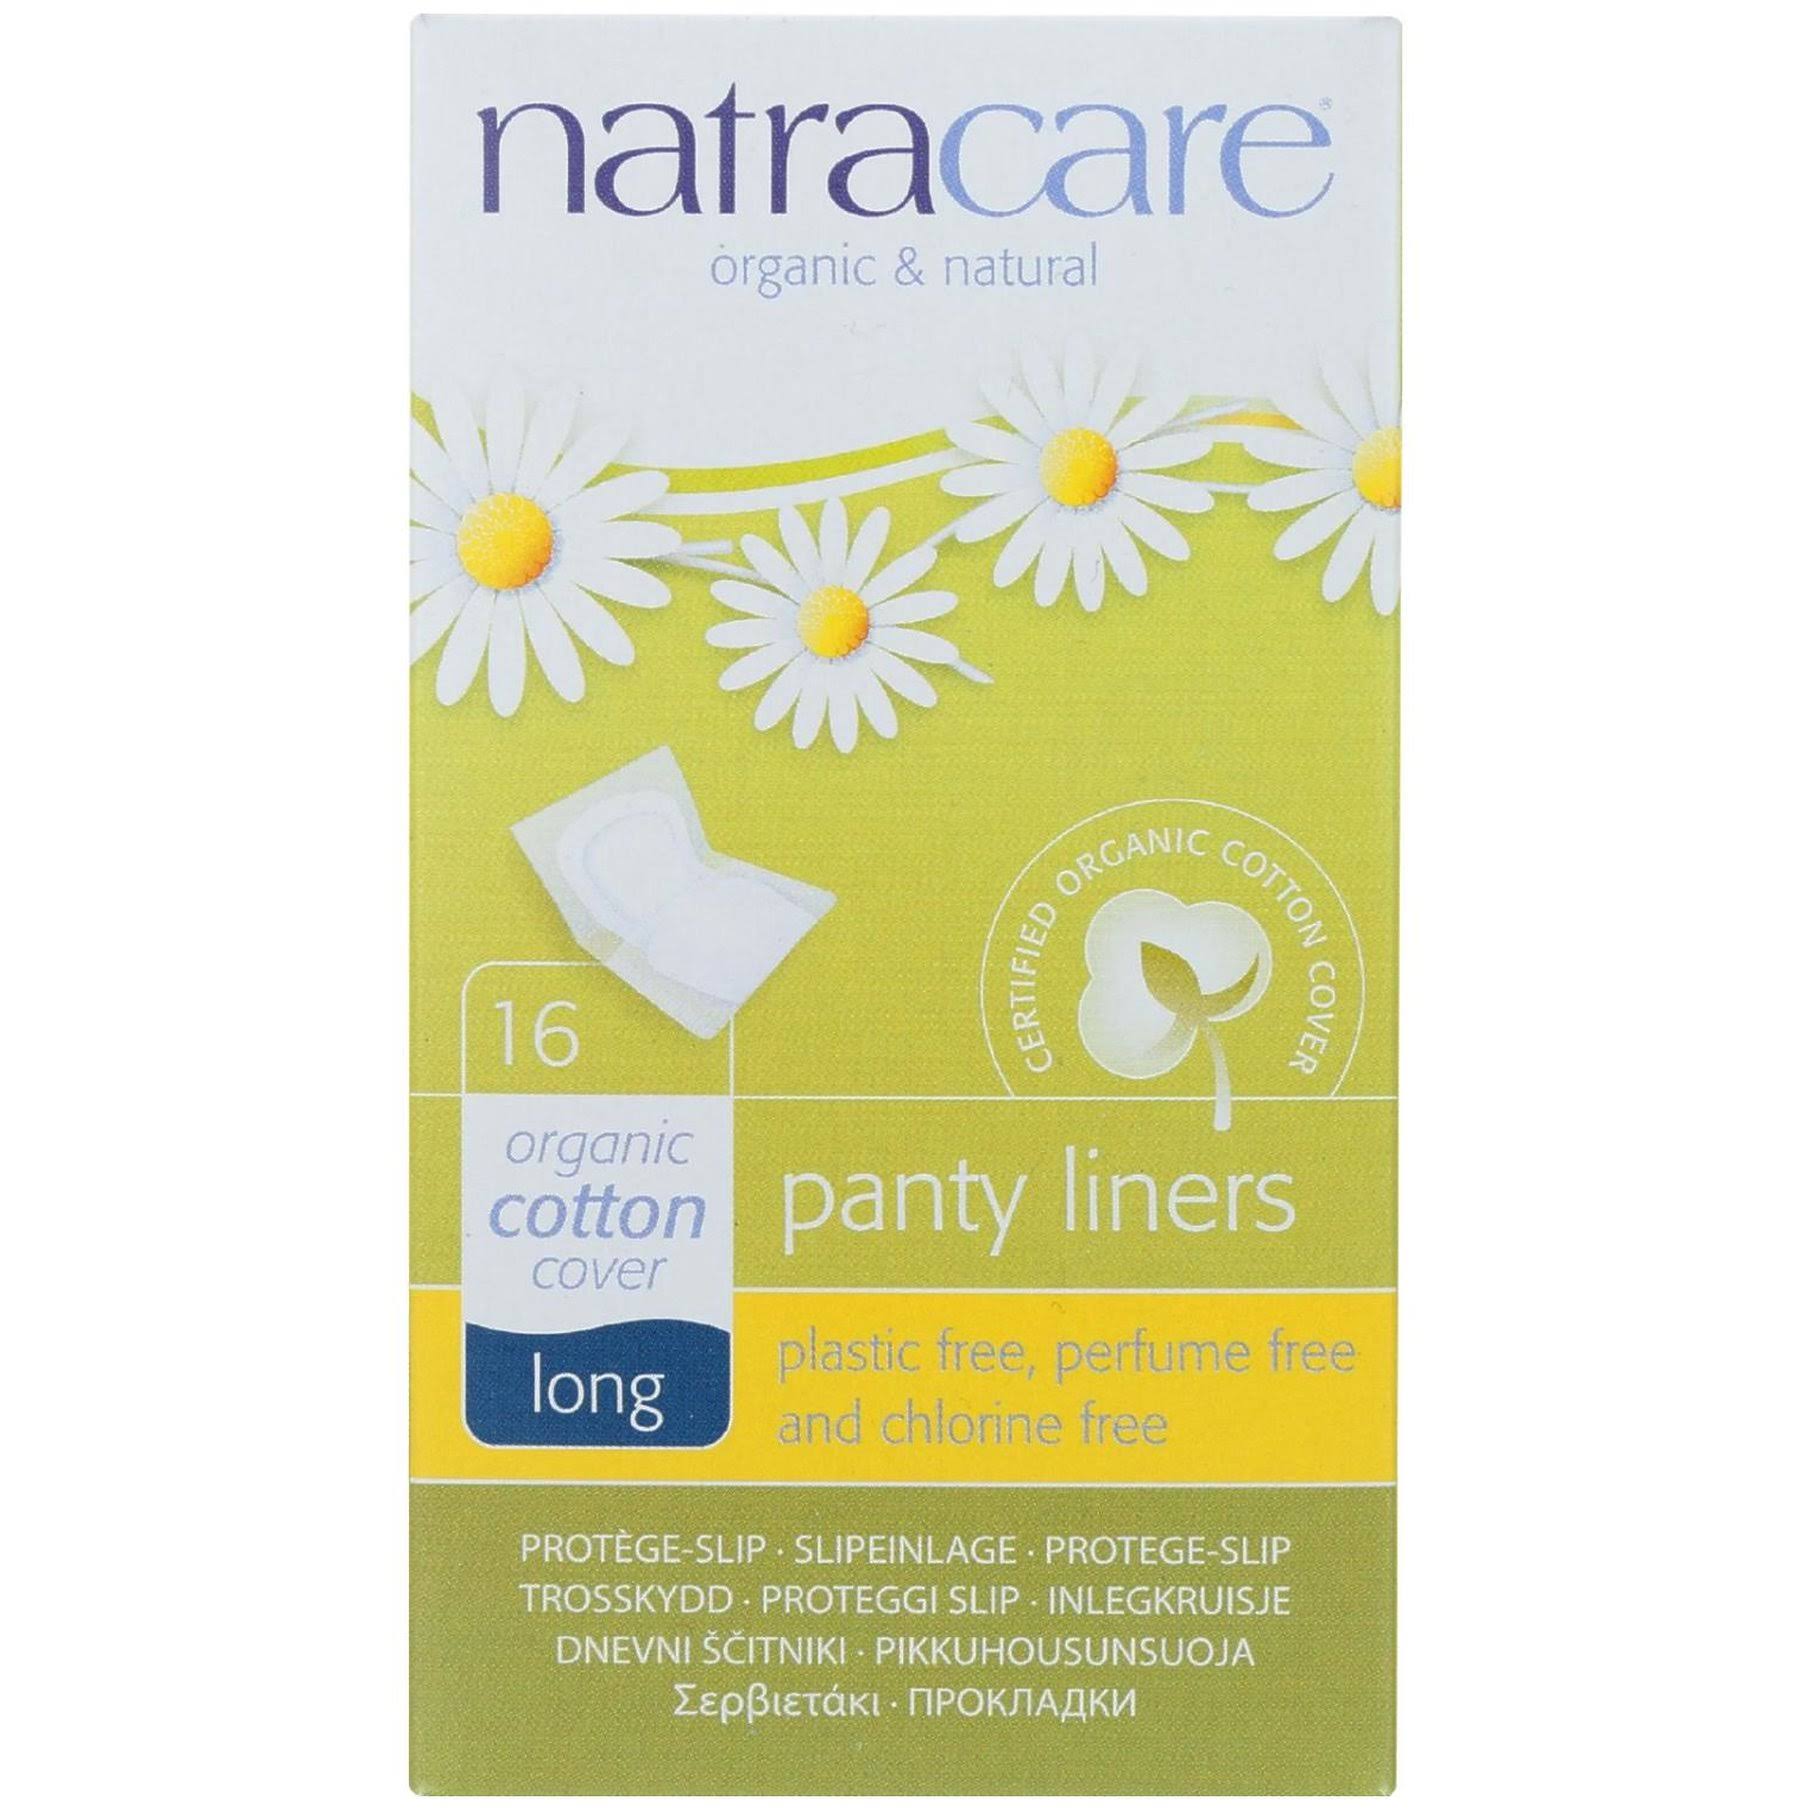 Natracare Organic Cotton Cover Long Panty Liners - 16pcs